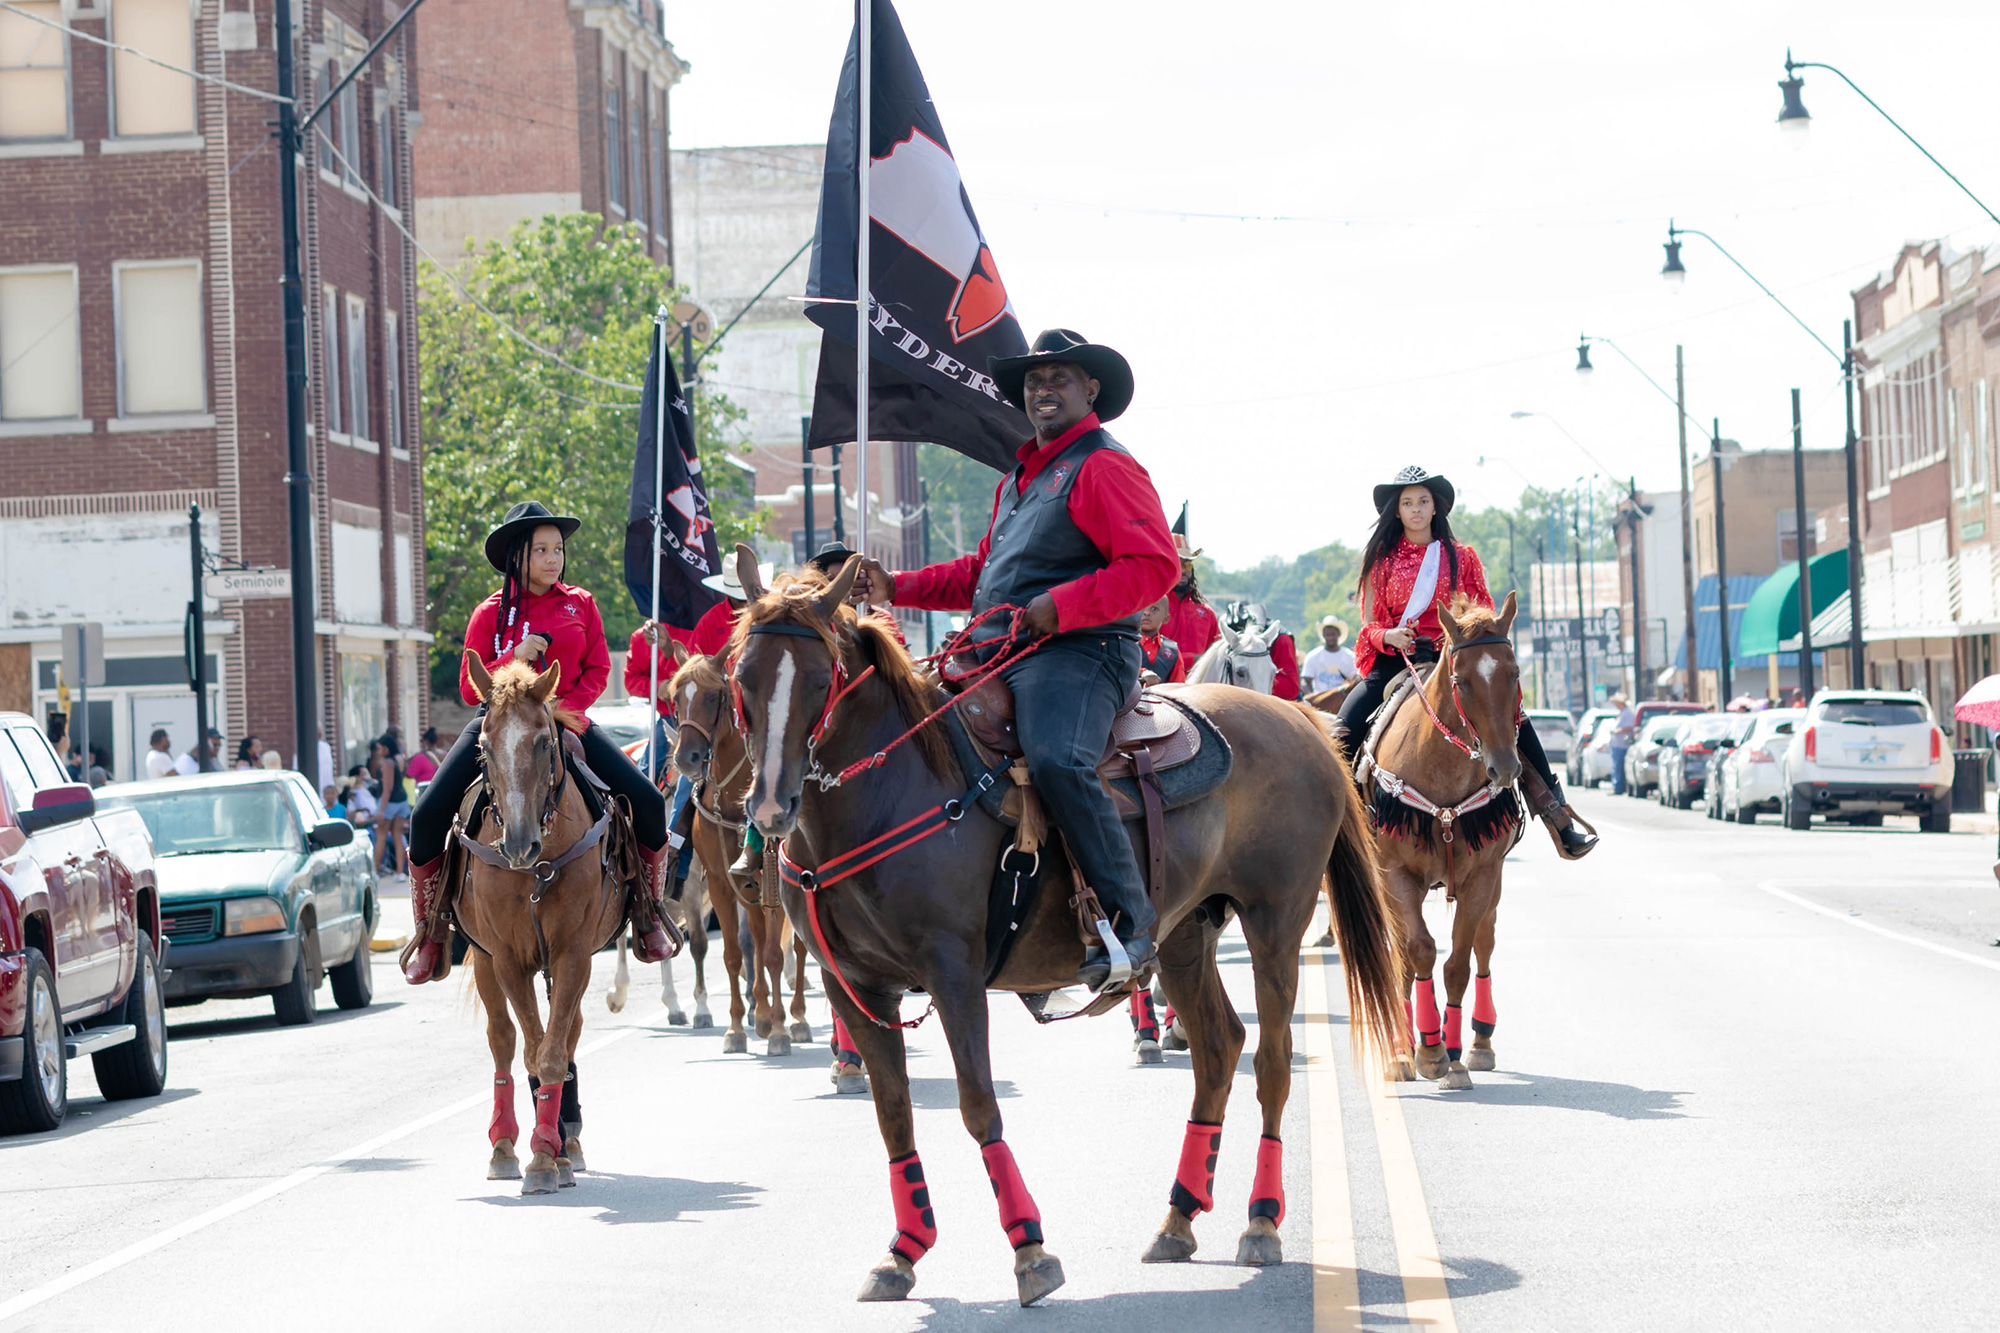 A group of black cowboys wearing black and red, riding brown horses